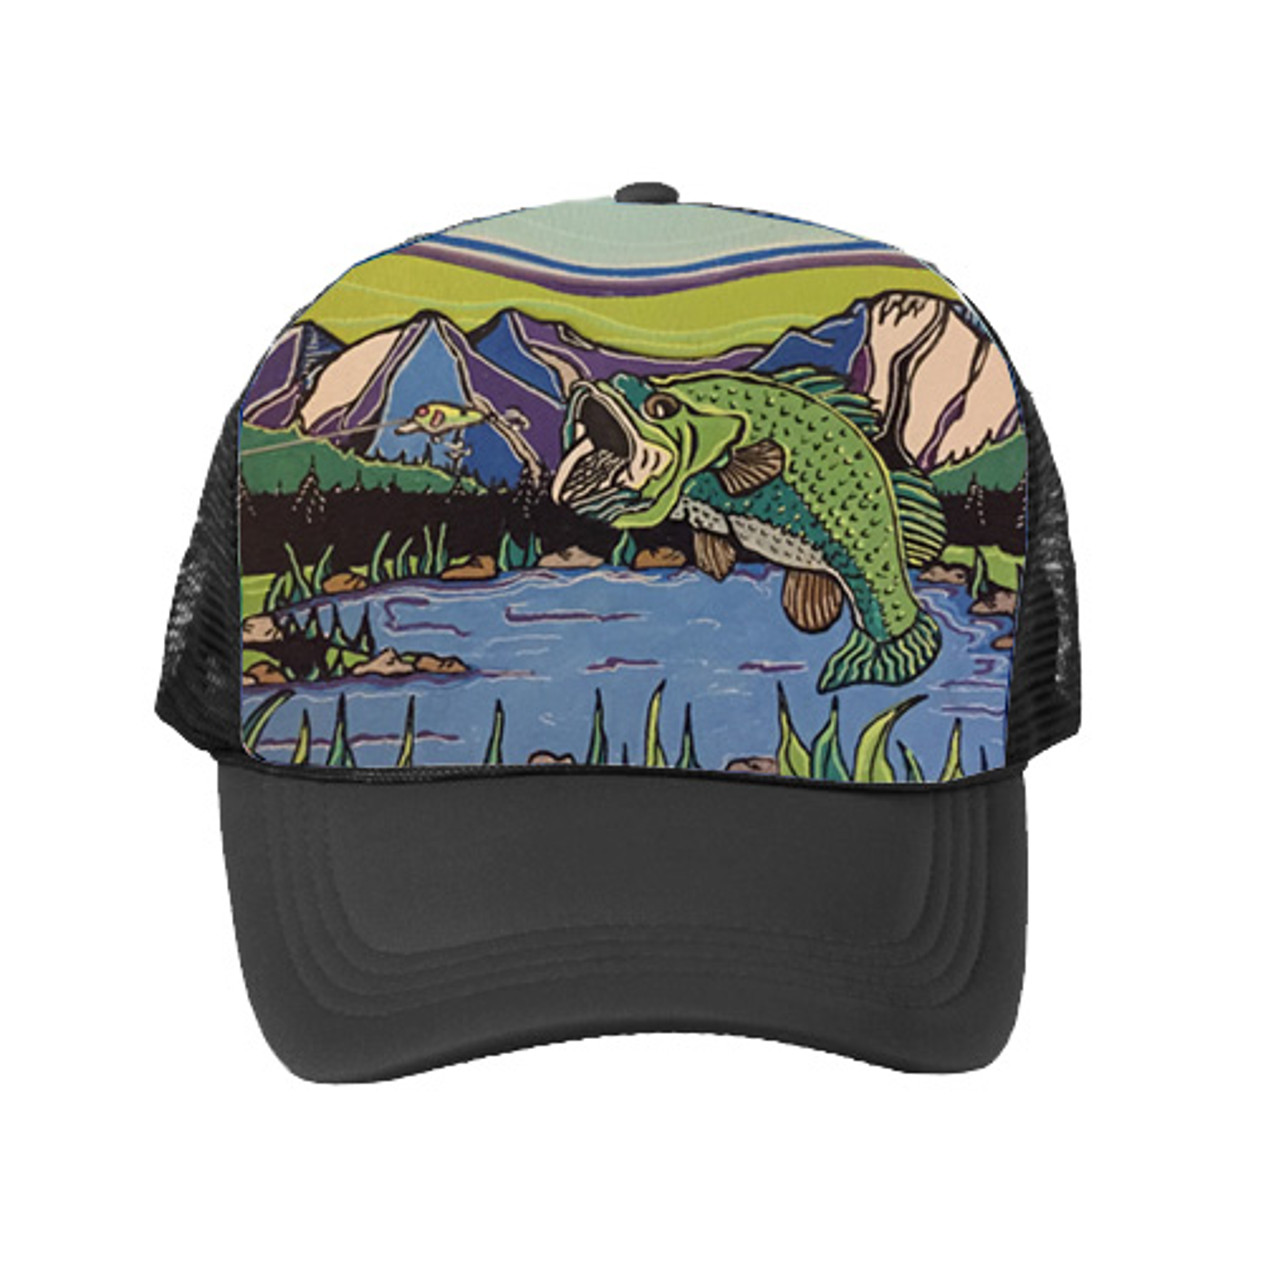 It's All About That Bass Low-Profile Trucker Snapback Hat - Black - Lure  Outdoors